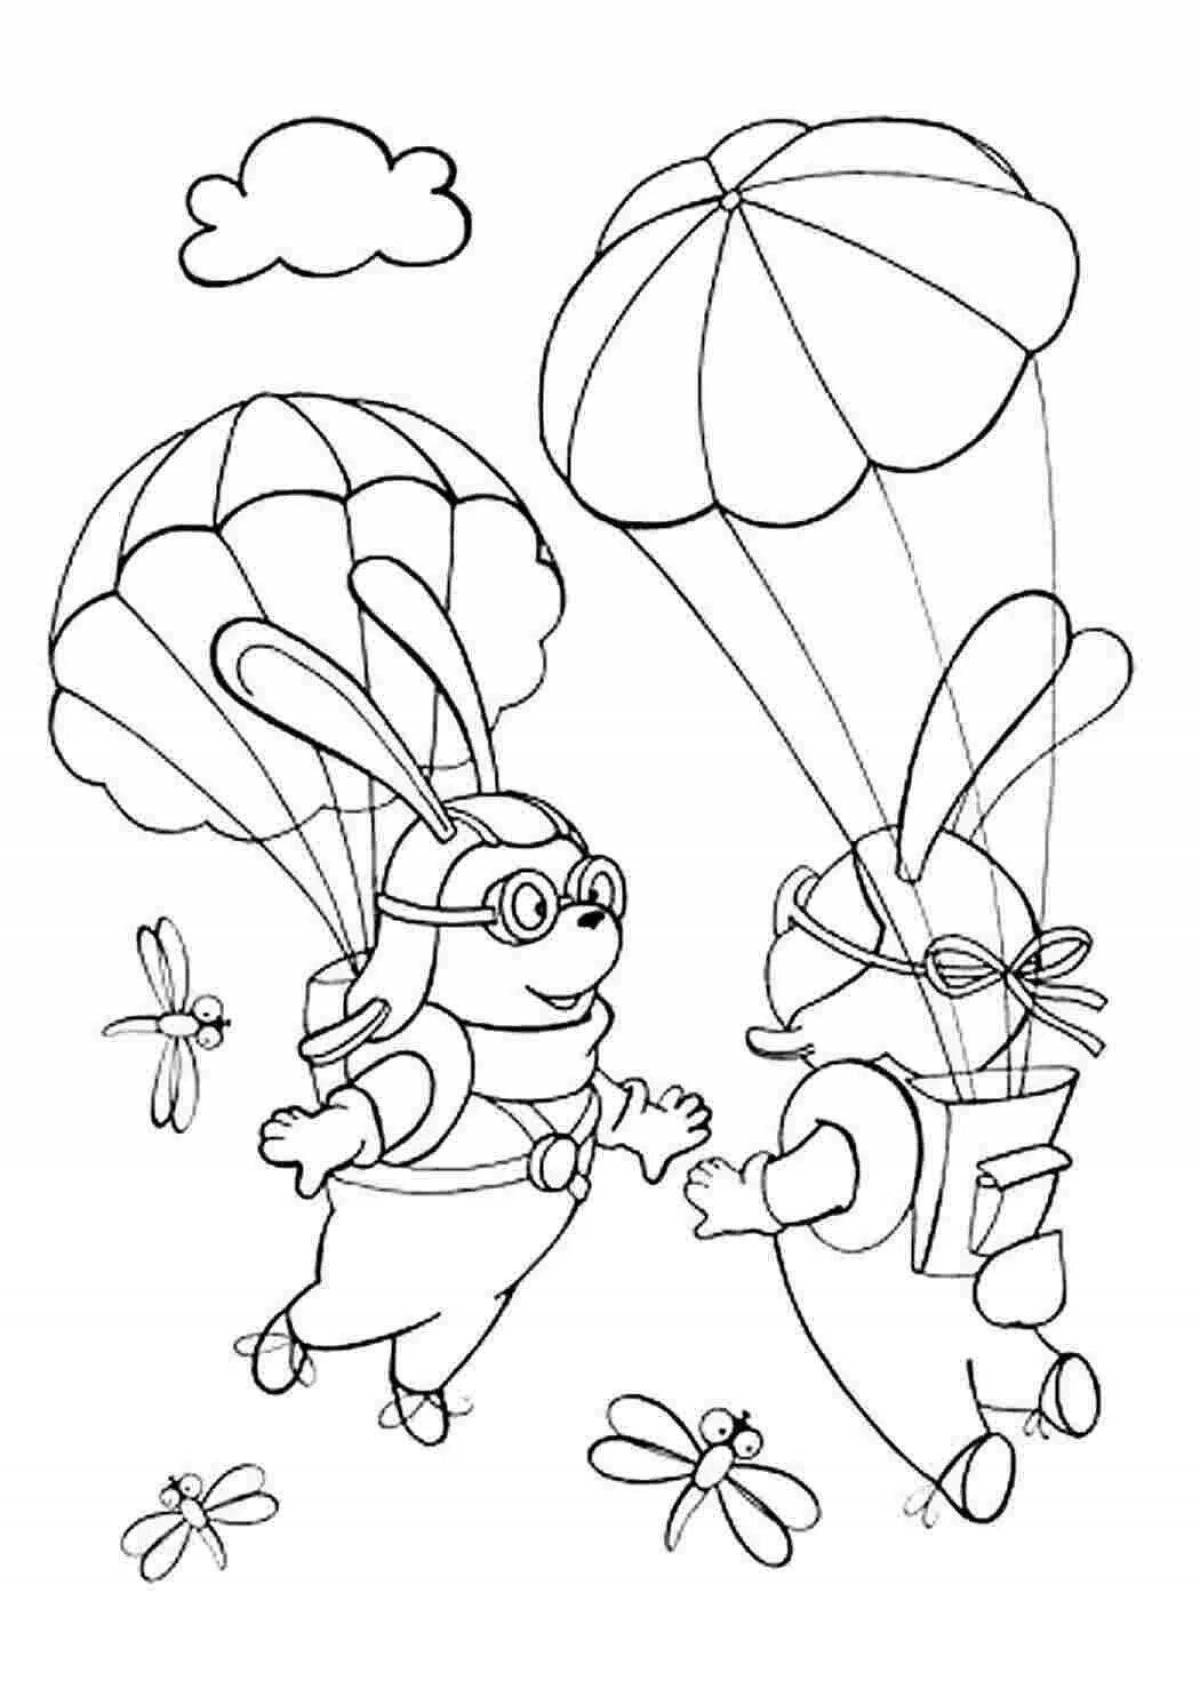 Colorful skydiver coloring page for kids